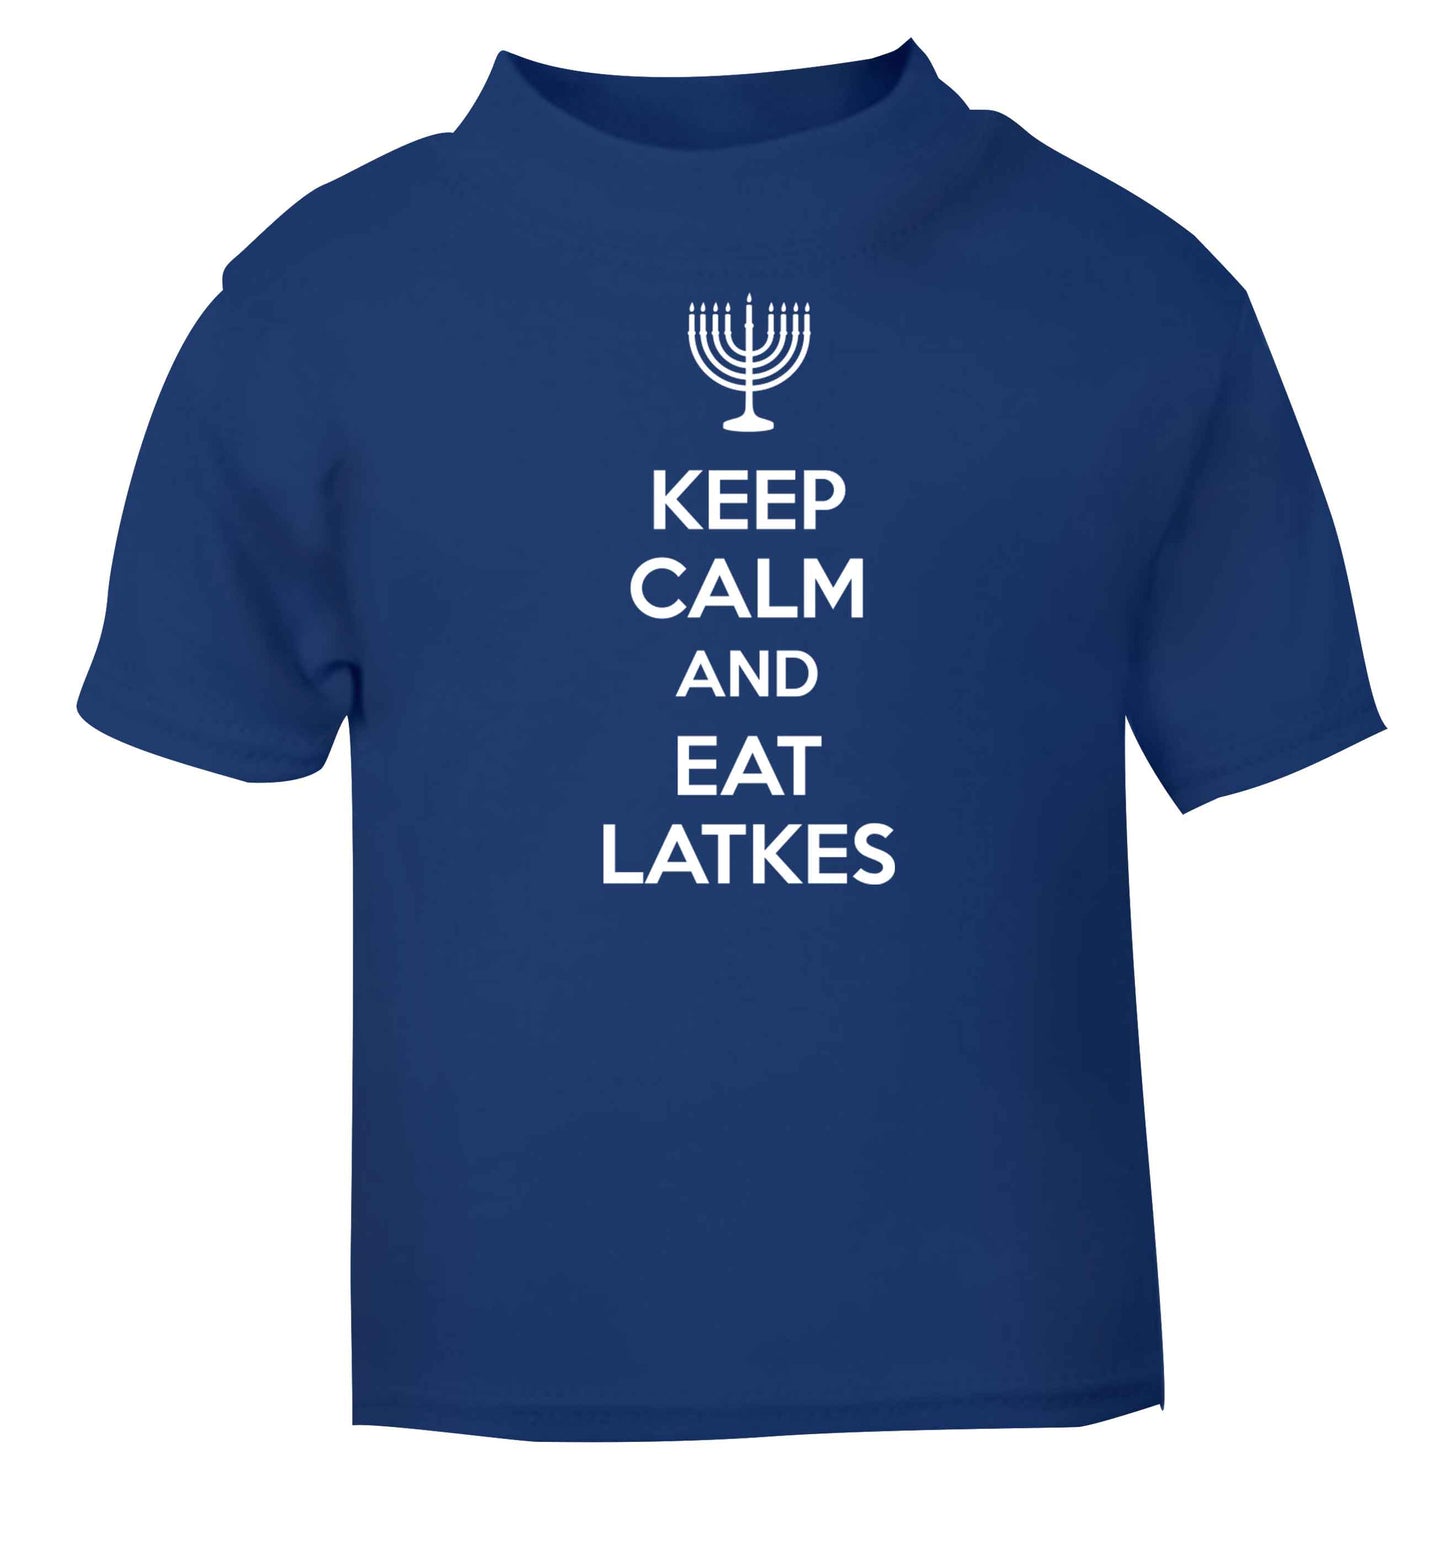 Keep calm and eat latkes blue baby toddler Tshirt 2 Years